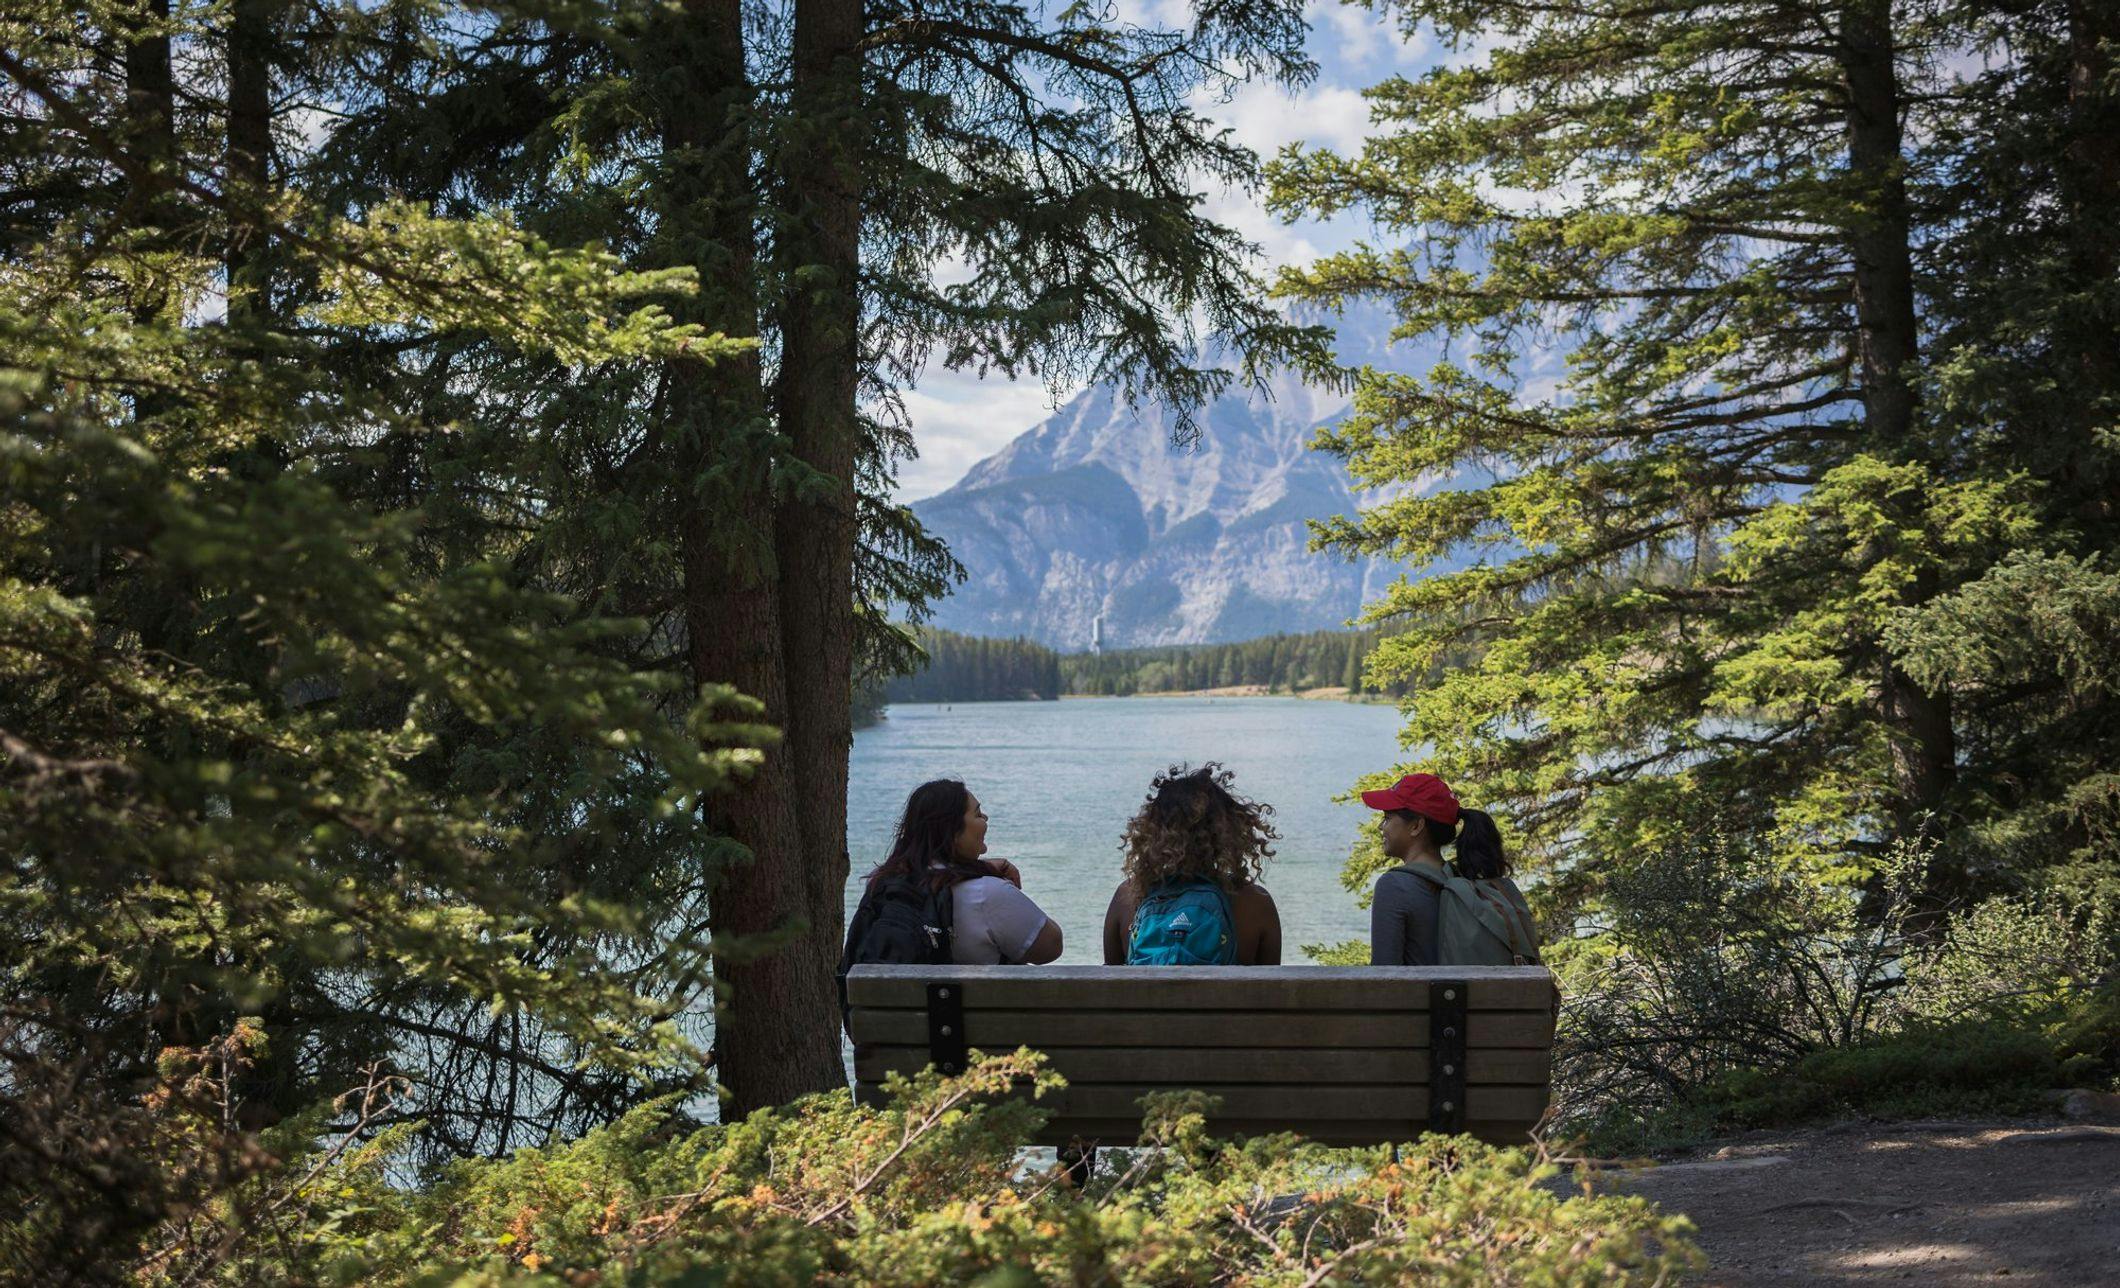 Three friends sit on a bench in a forested area looking out at a glacial blue lake